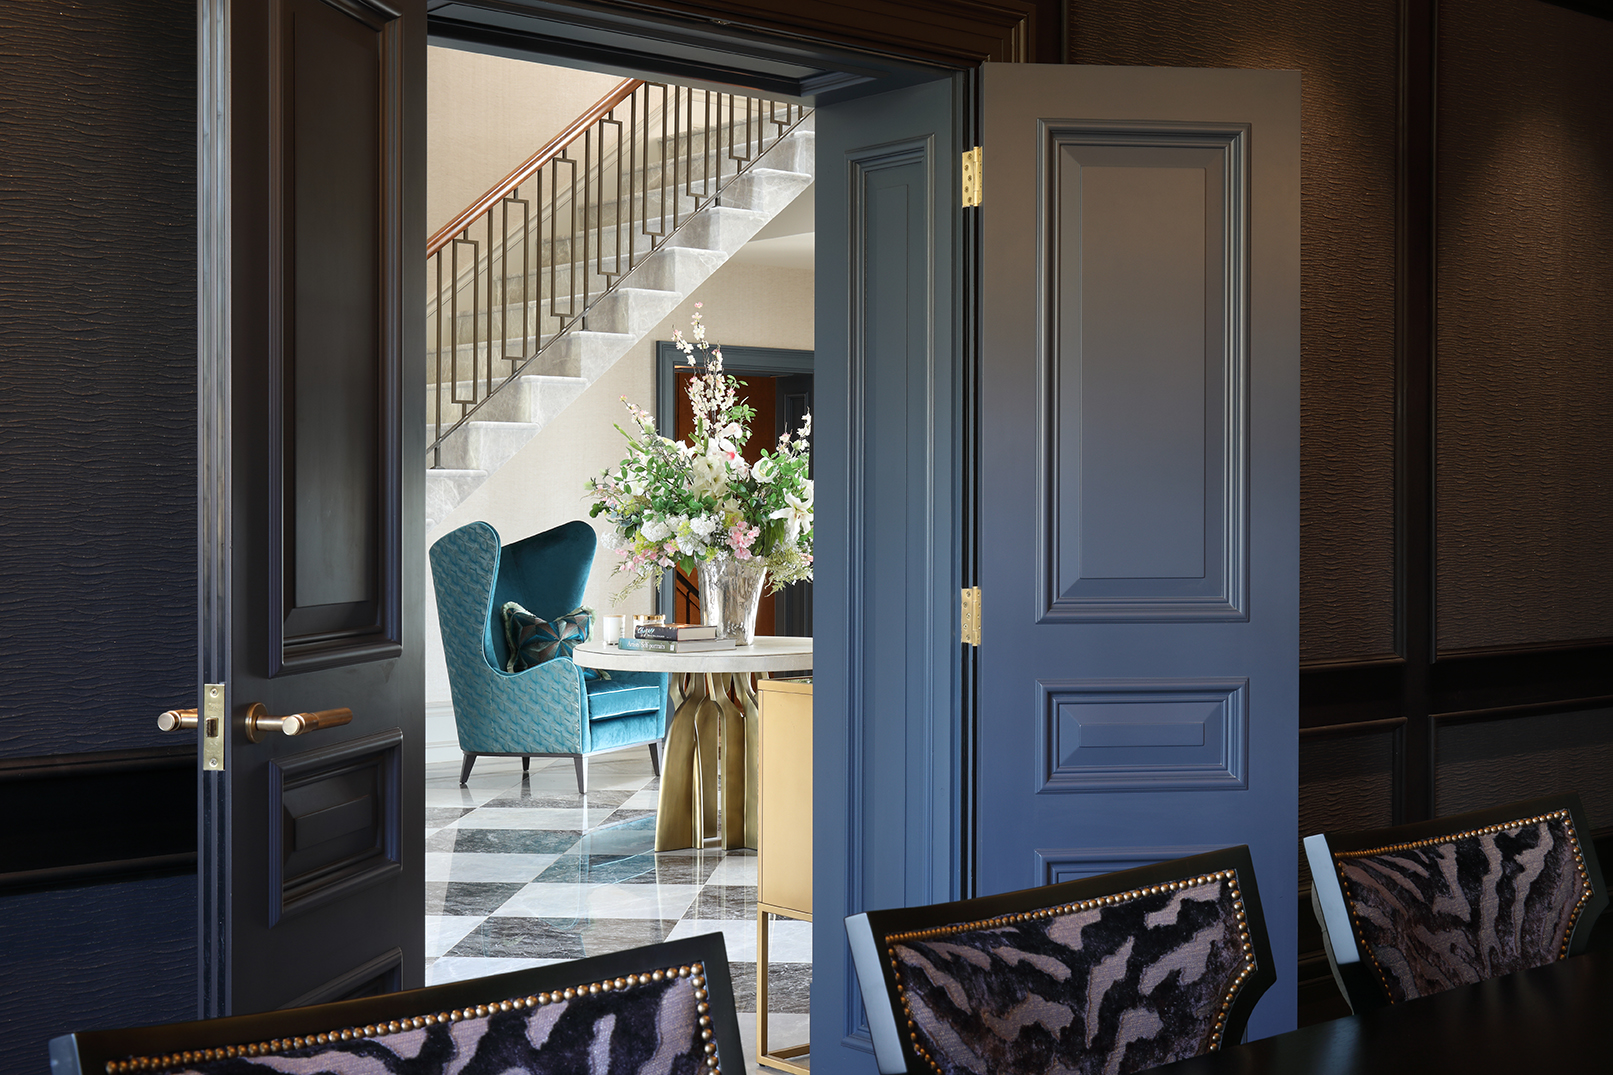 View from dining room through double doors to hall with turquoise wingback chair and staircase